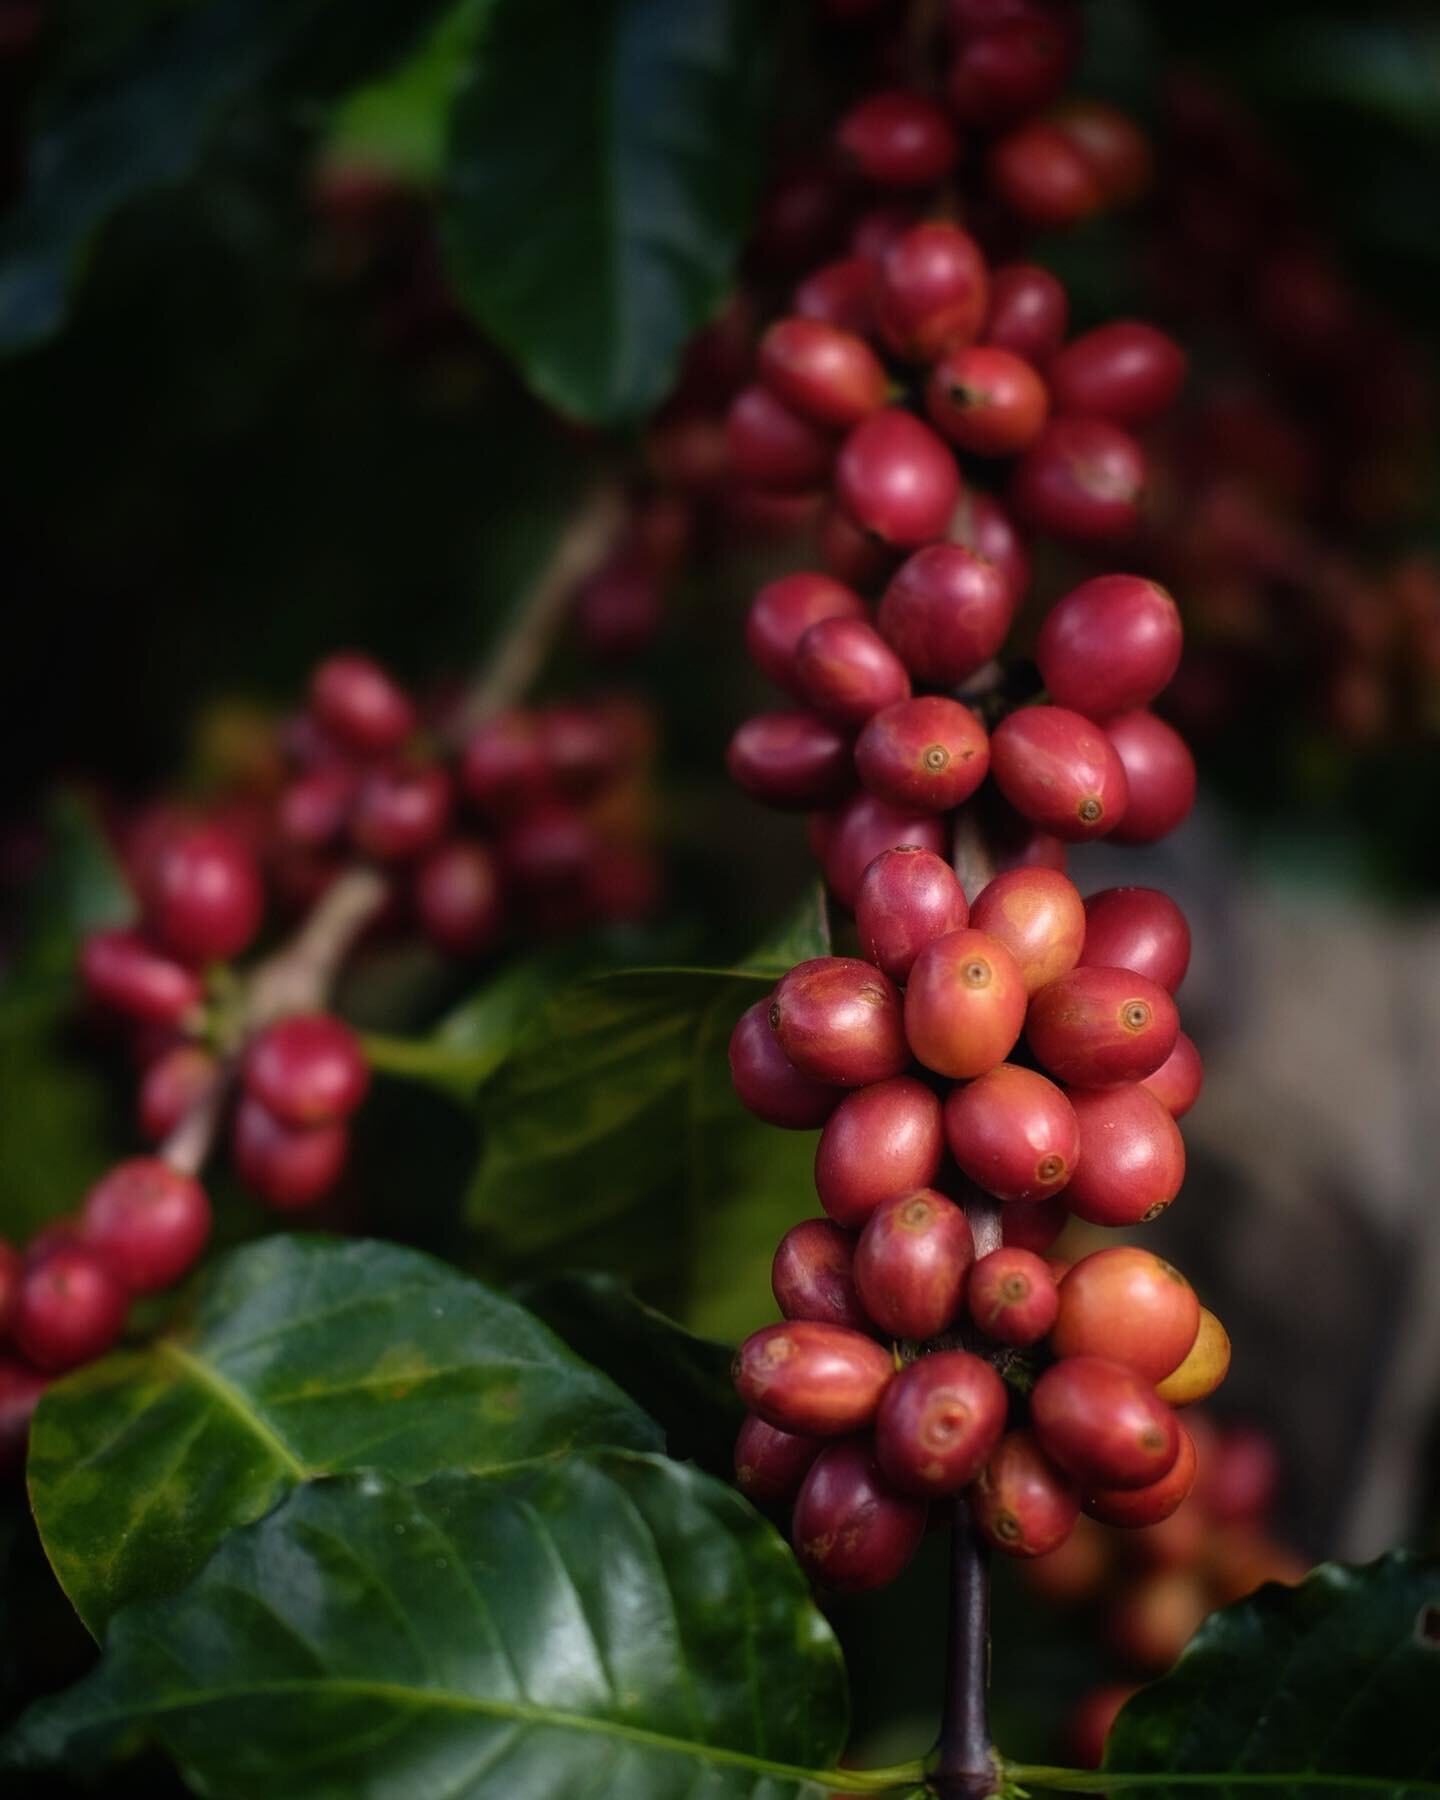 With the first round of picking done we patiently wait for the cherries we left off to to ripen. Harvesting full ripe ensures maximum flavor precursors. 
.
.
#coffeeart #coffeetime #coffeelover #coffeeshop #coffeeroasters #coffeeroastery #coffeeshots